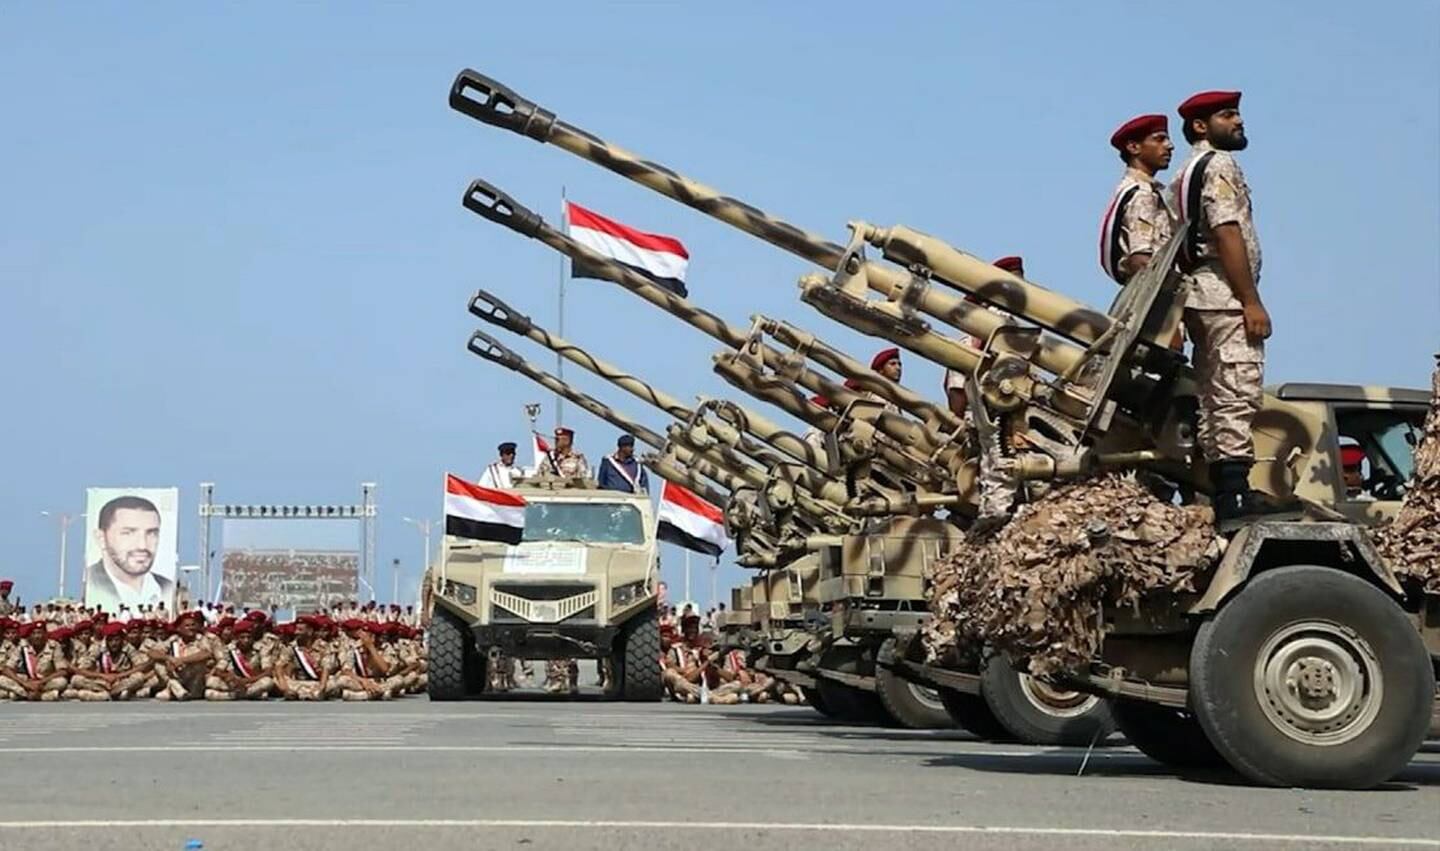 Pro-Houthis forces parade in Yemen's western city of Hodeidah on September 1, 2022. Houthi military handout / EPA